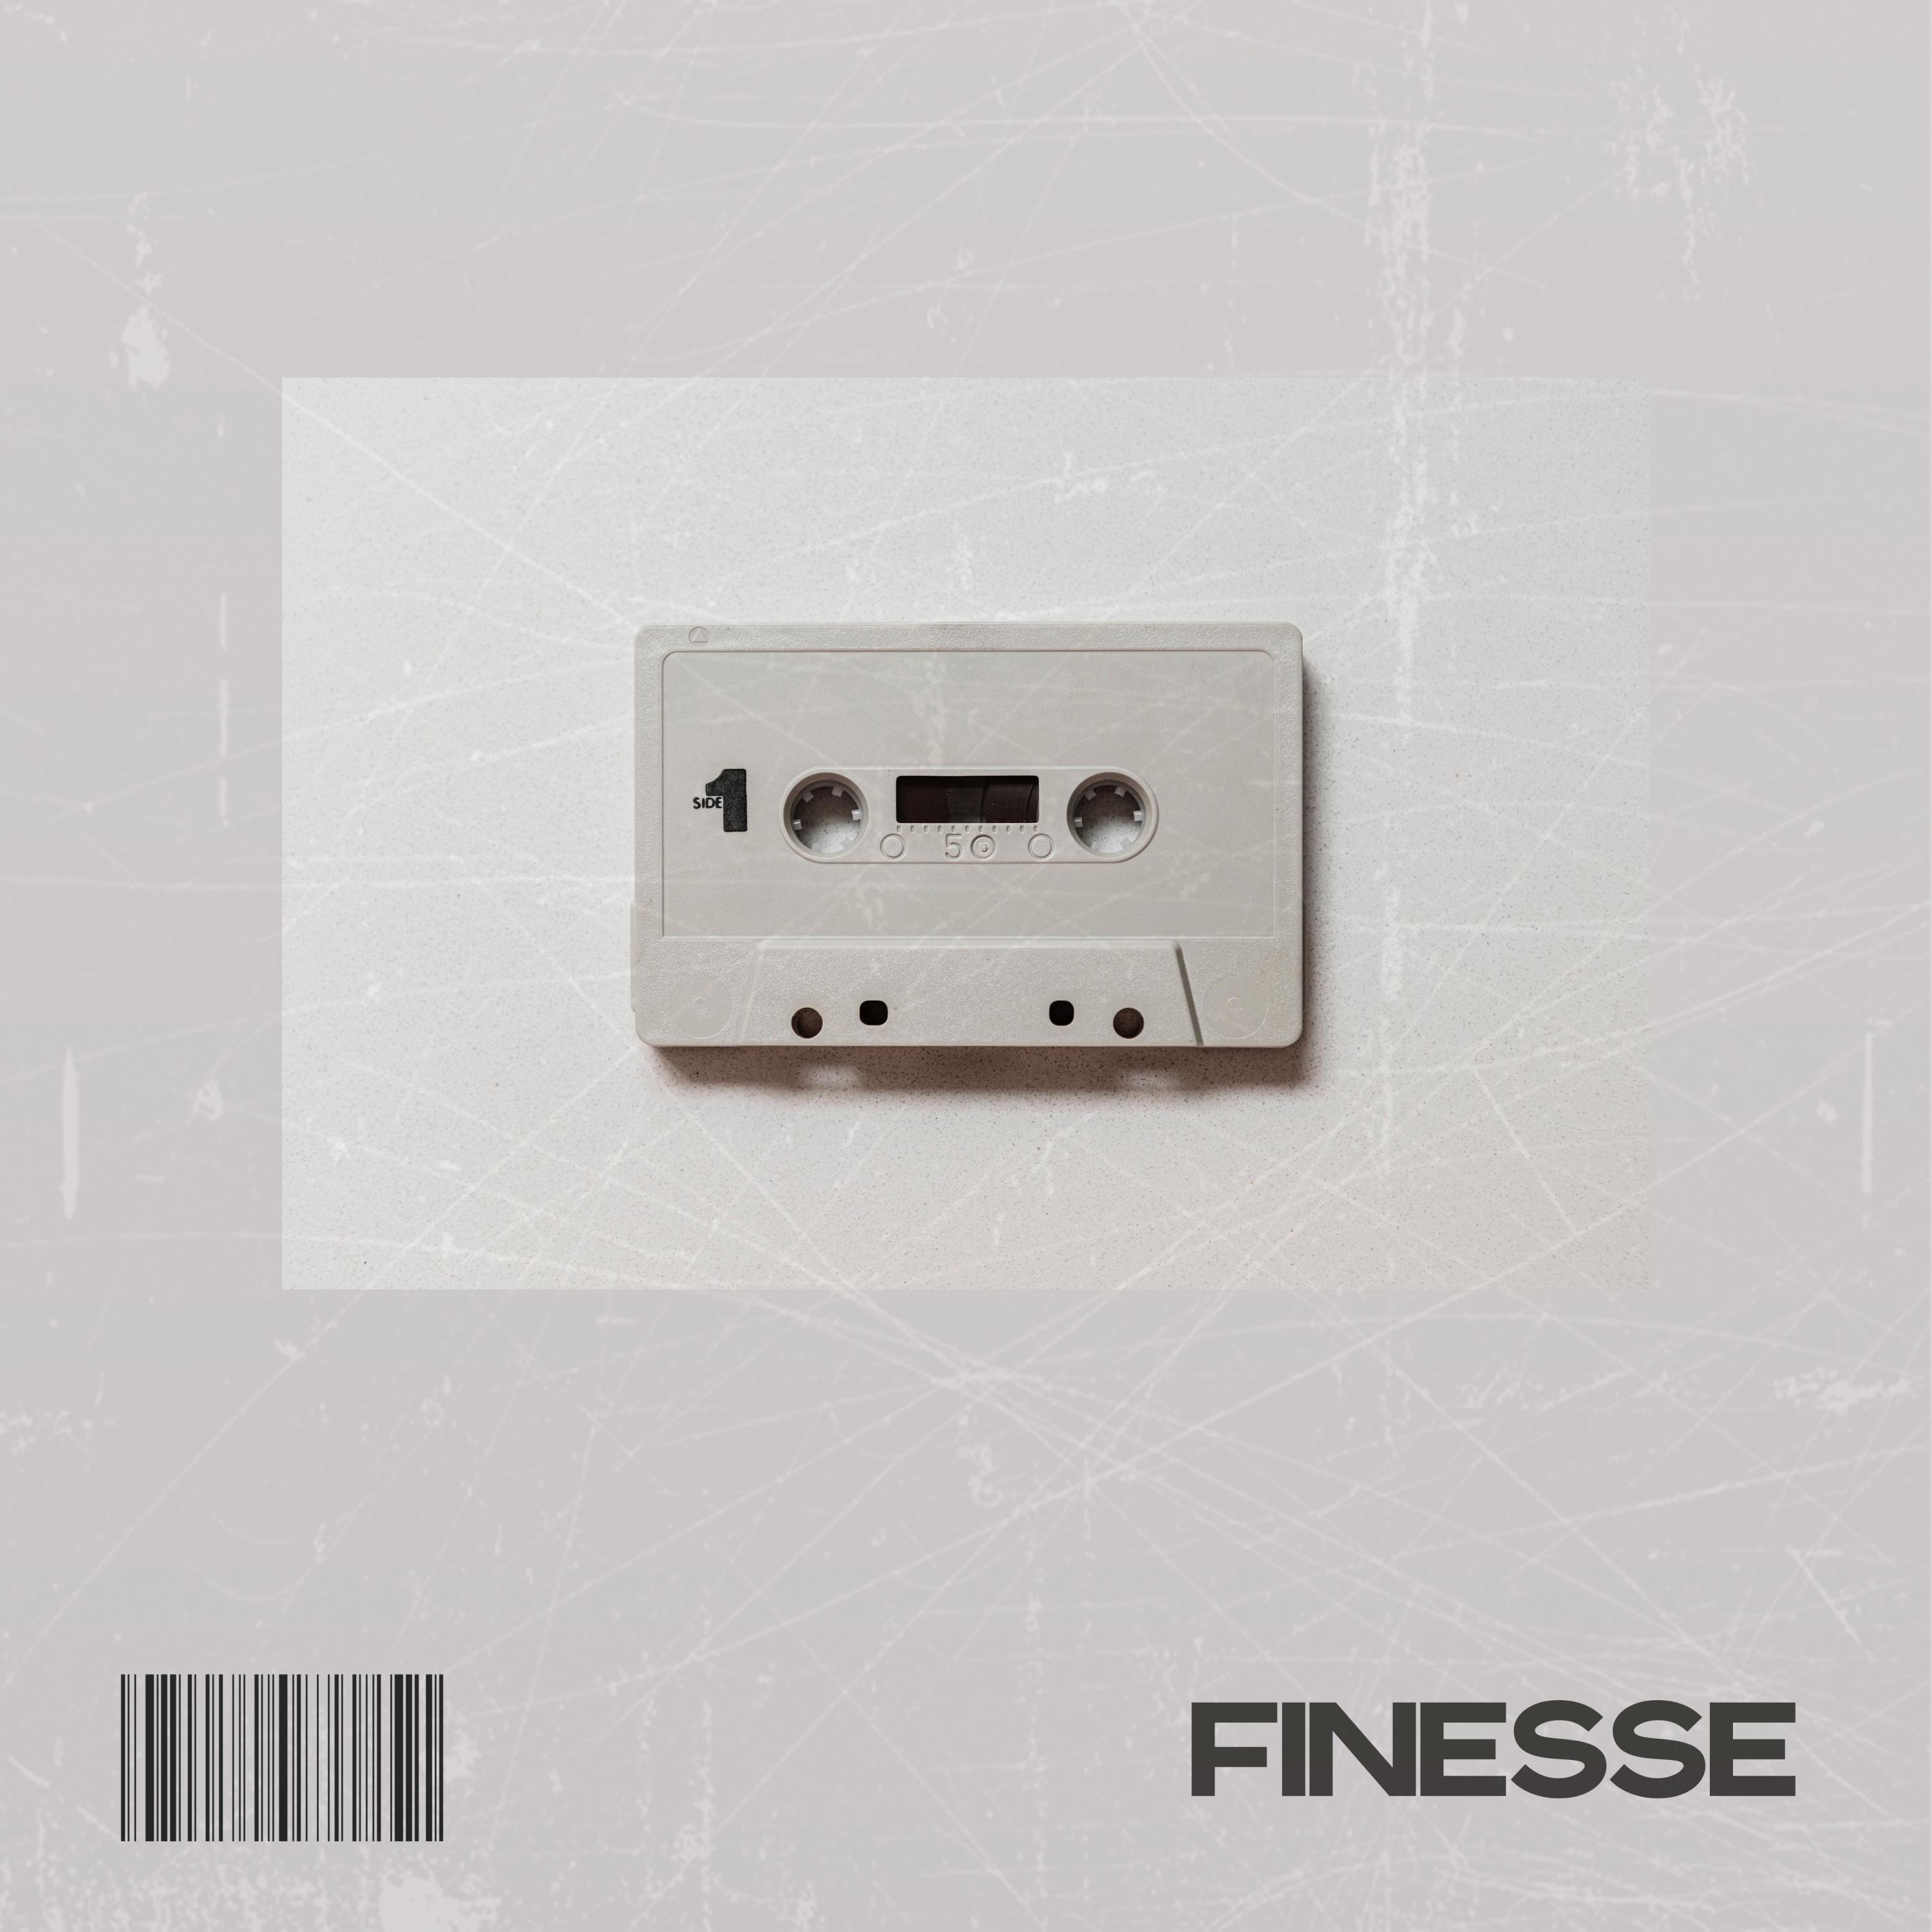 Norma ZM - FINESSE